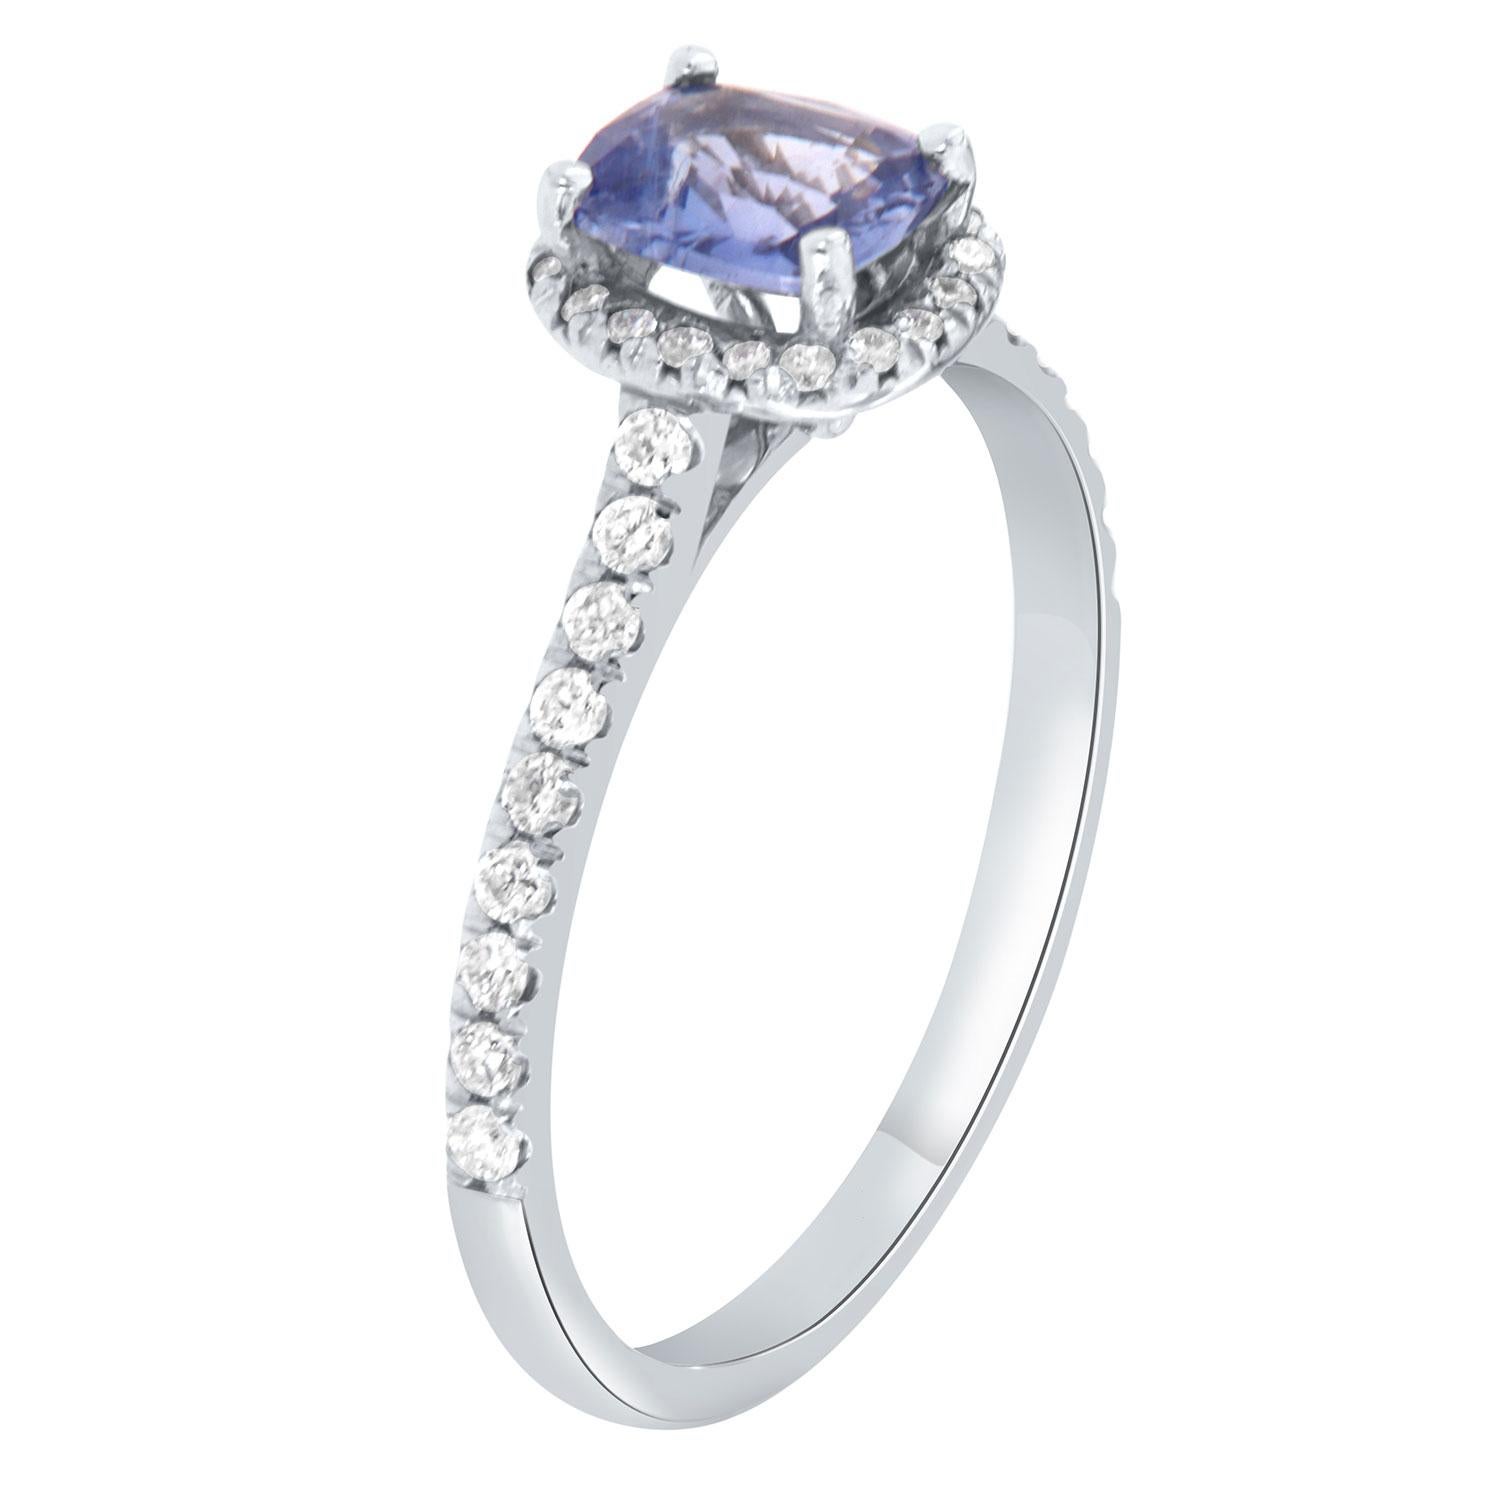 This delicate 14k white gold ring features a 0.95-Carat natural Non-Heated Elongated Cushion shape Sri-Lankan Sapphire encircled by a halo of brilliant round diamonds on top of a 1.8 MM wide diamond band.
This beautiful Sapphire exhibits a vibrant